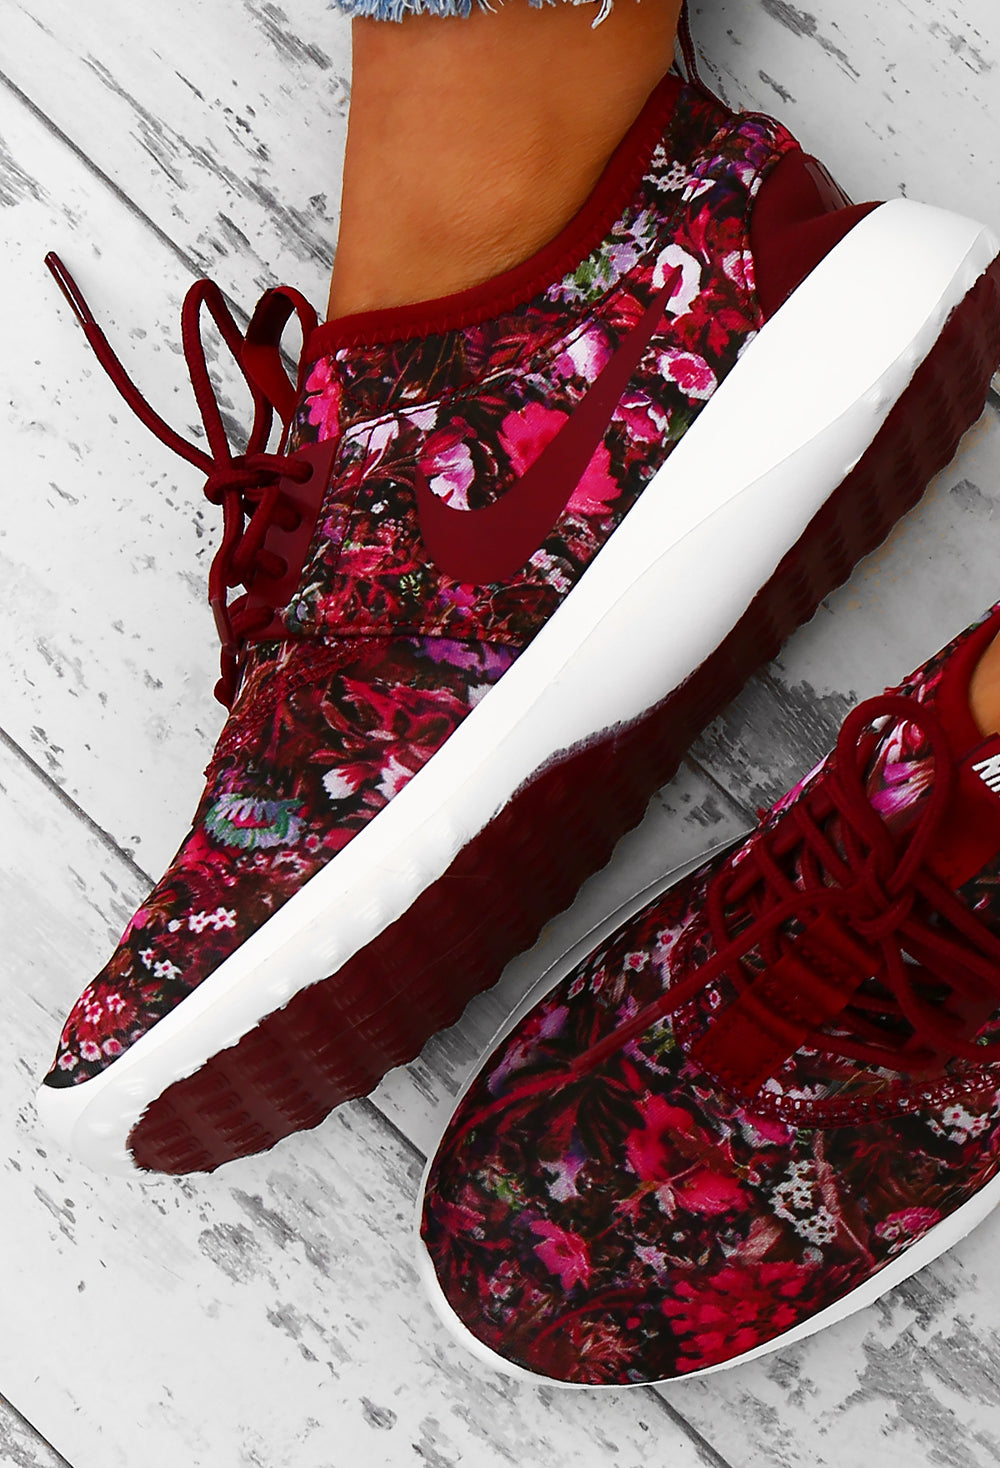 womens floral nike trainers